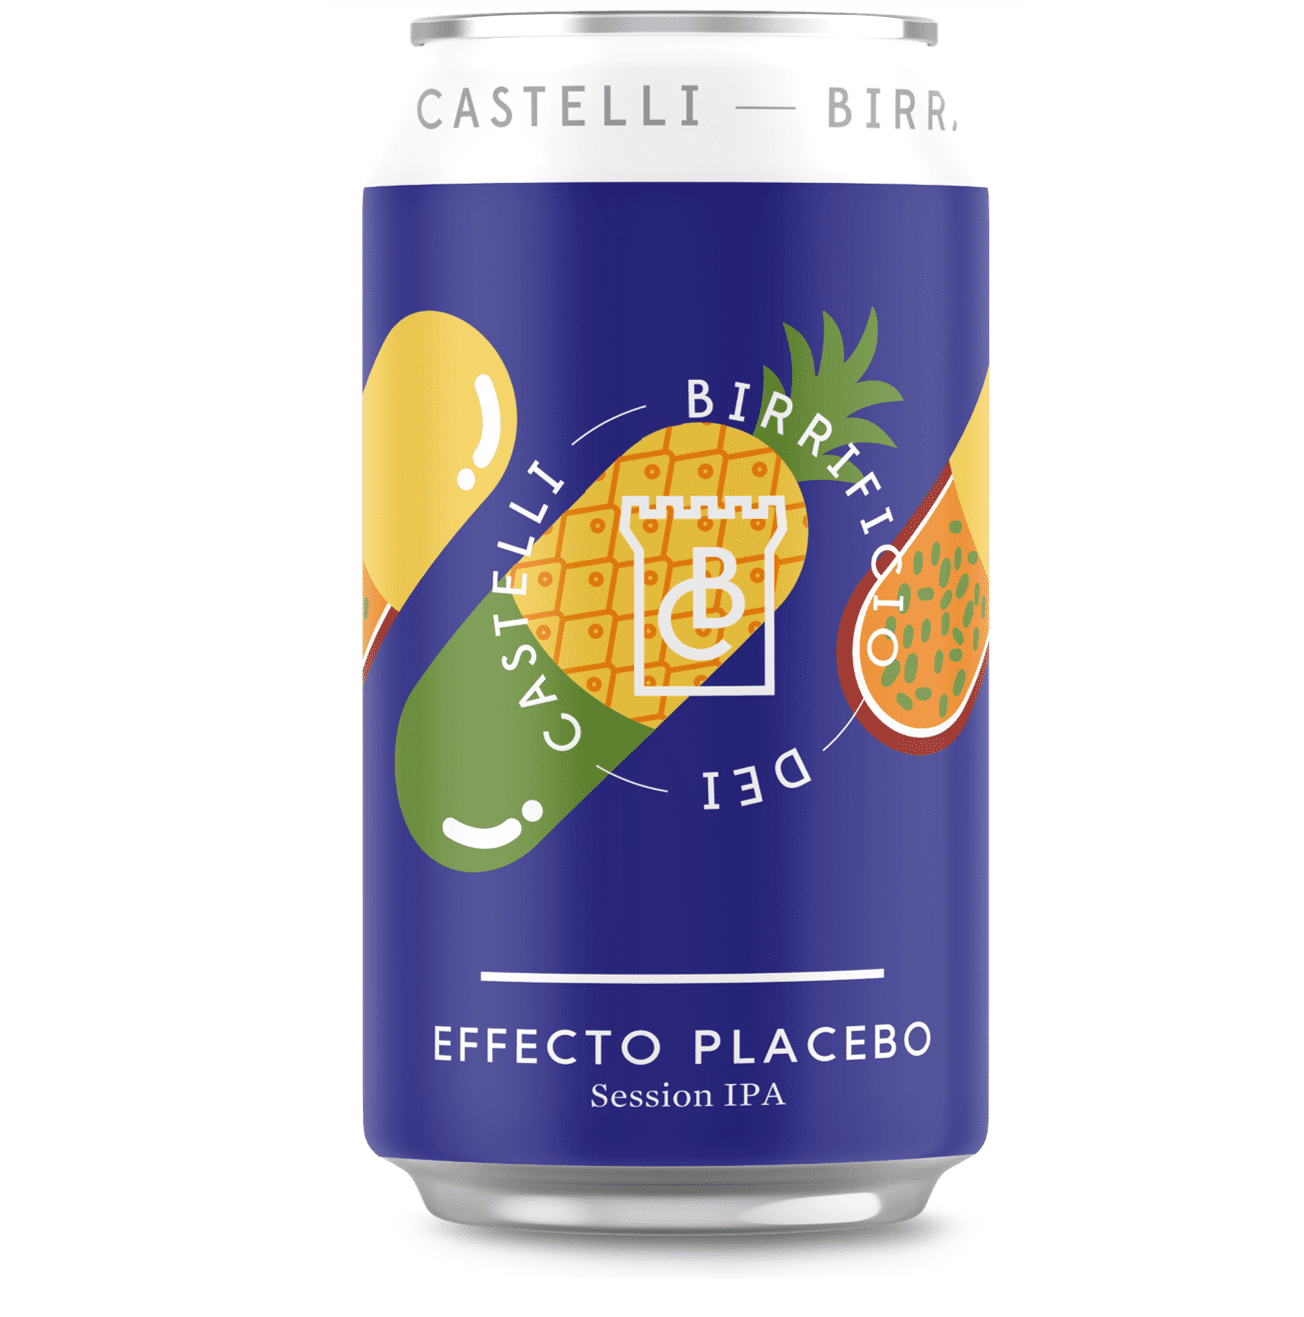 craft beer, made in italy, italian craft beer, session ipa, effecto placebo, american hops, ipa